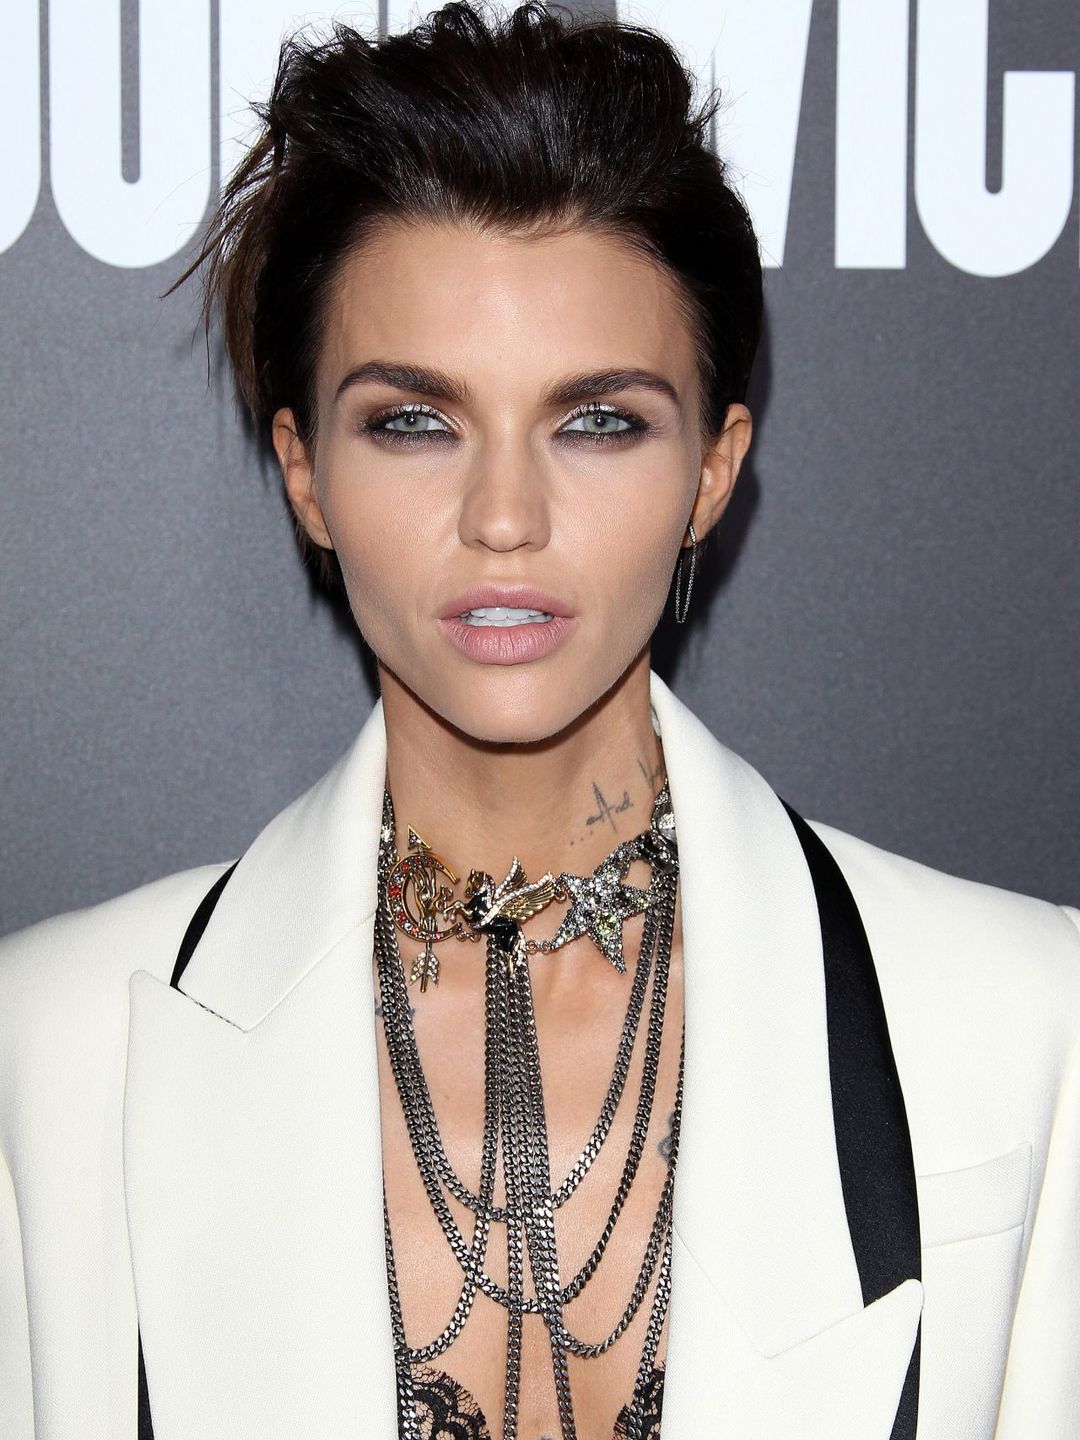 Ruby Rose young age